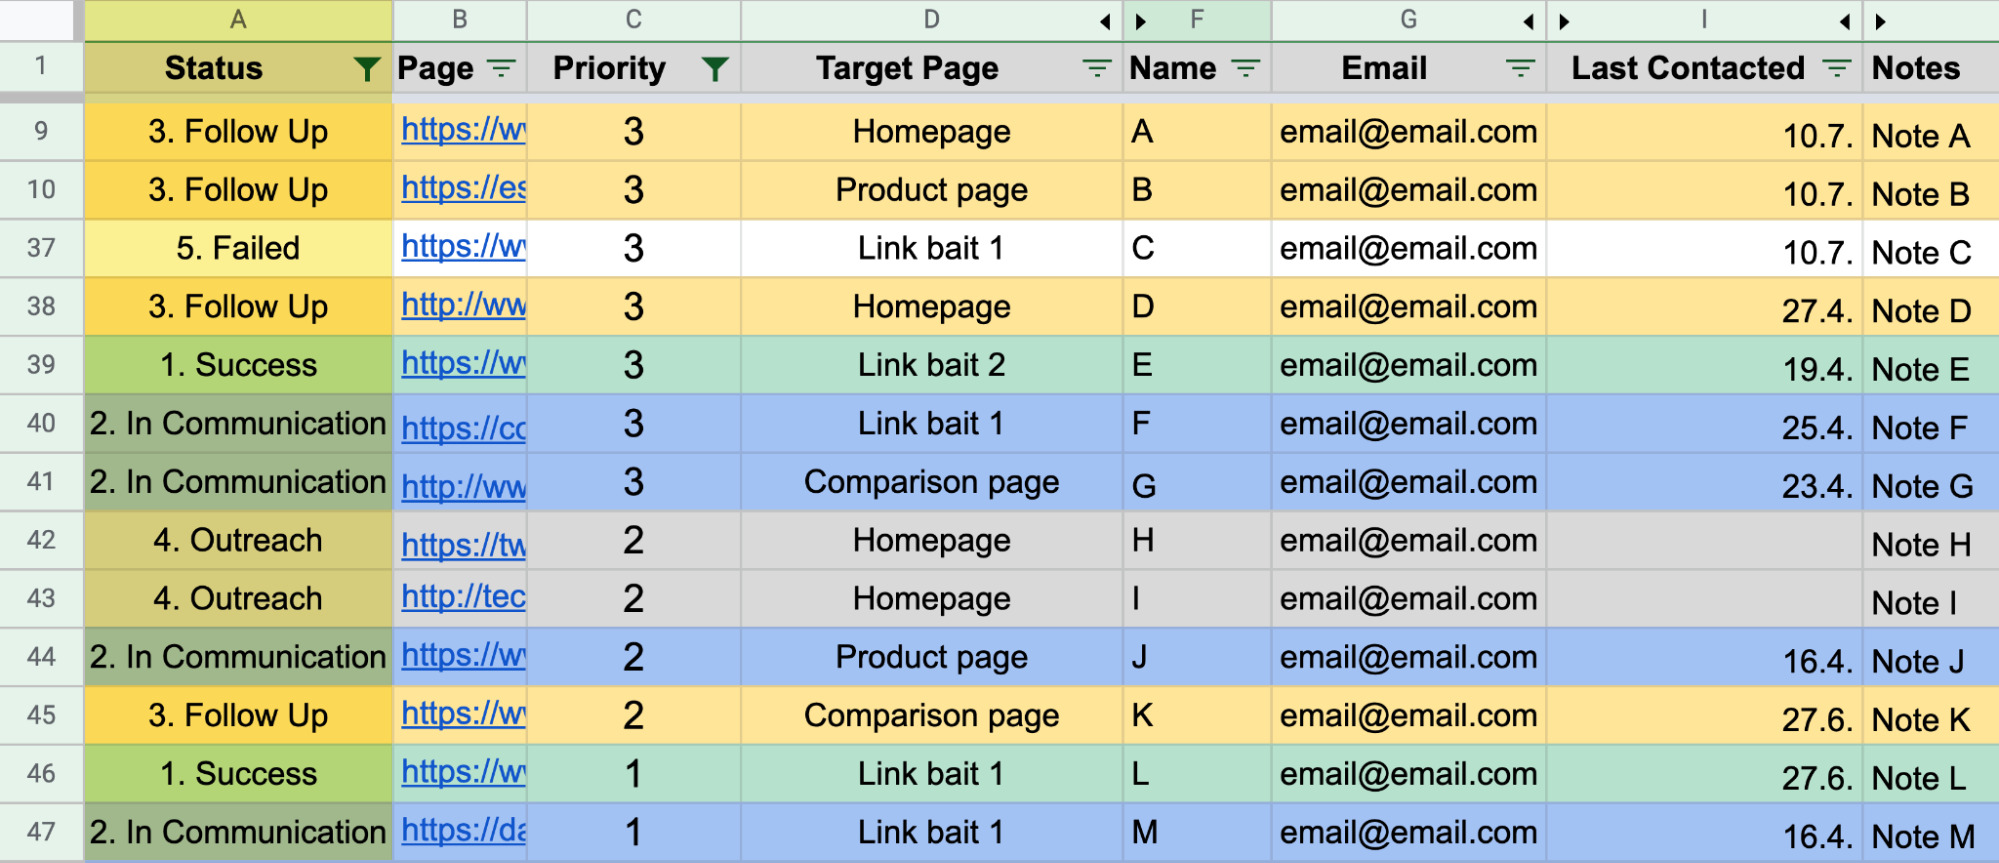 New backlinks built tracking in Google Sheets
